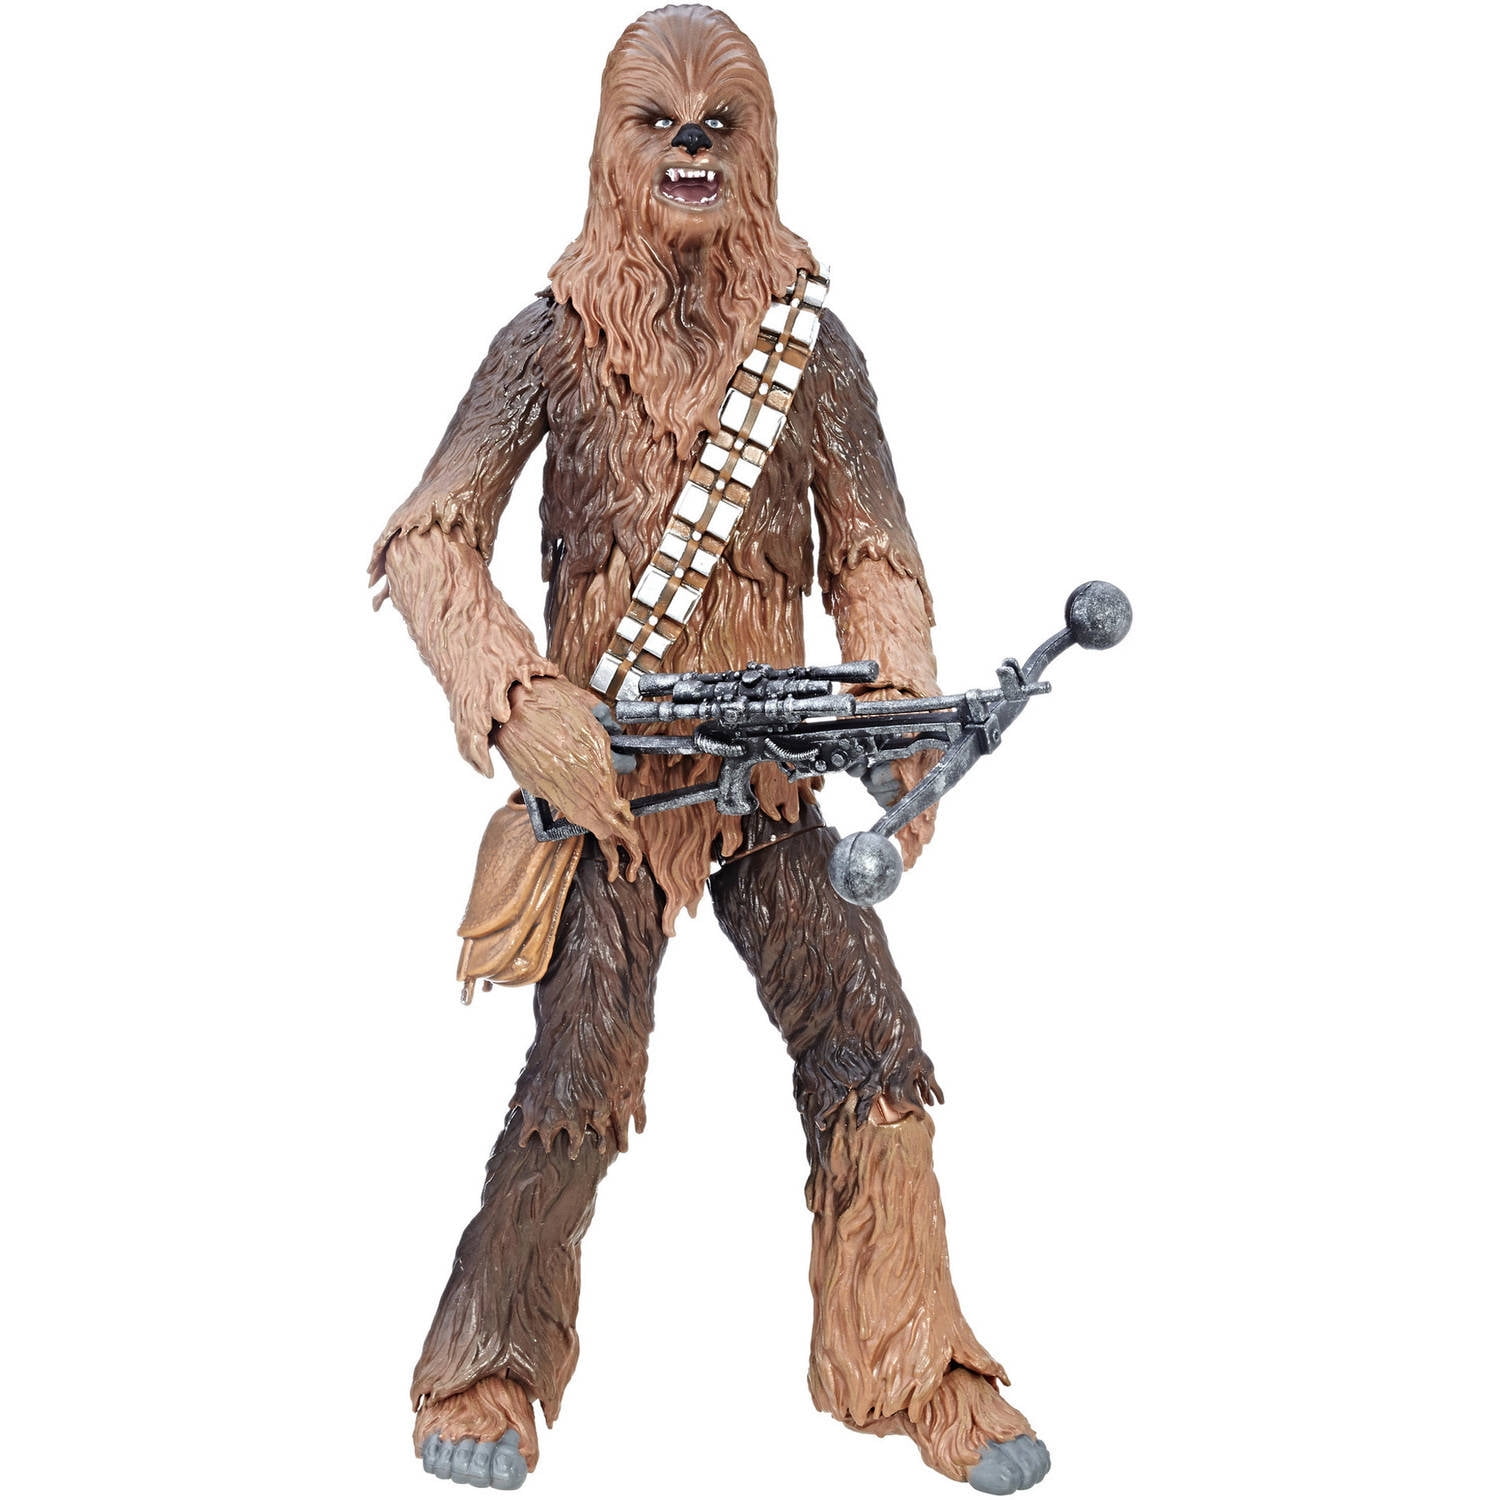 CUSTOM 2" Bowcaster Weapon for 1977 4" Chewbacca Vintage Star Wars 